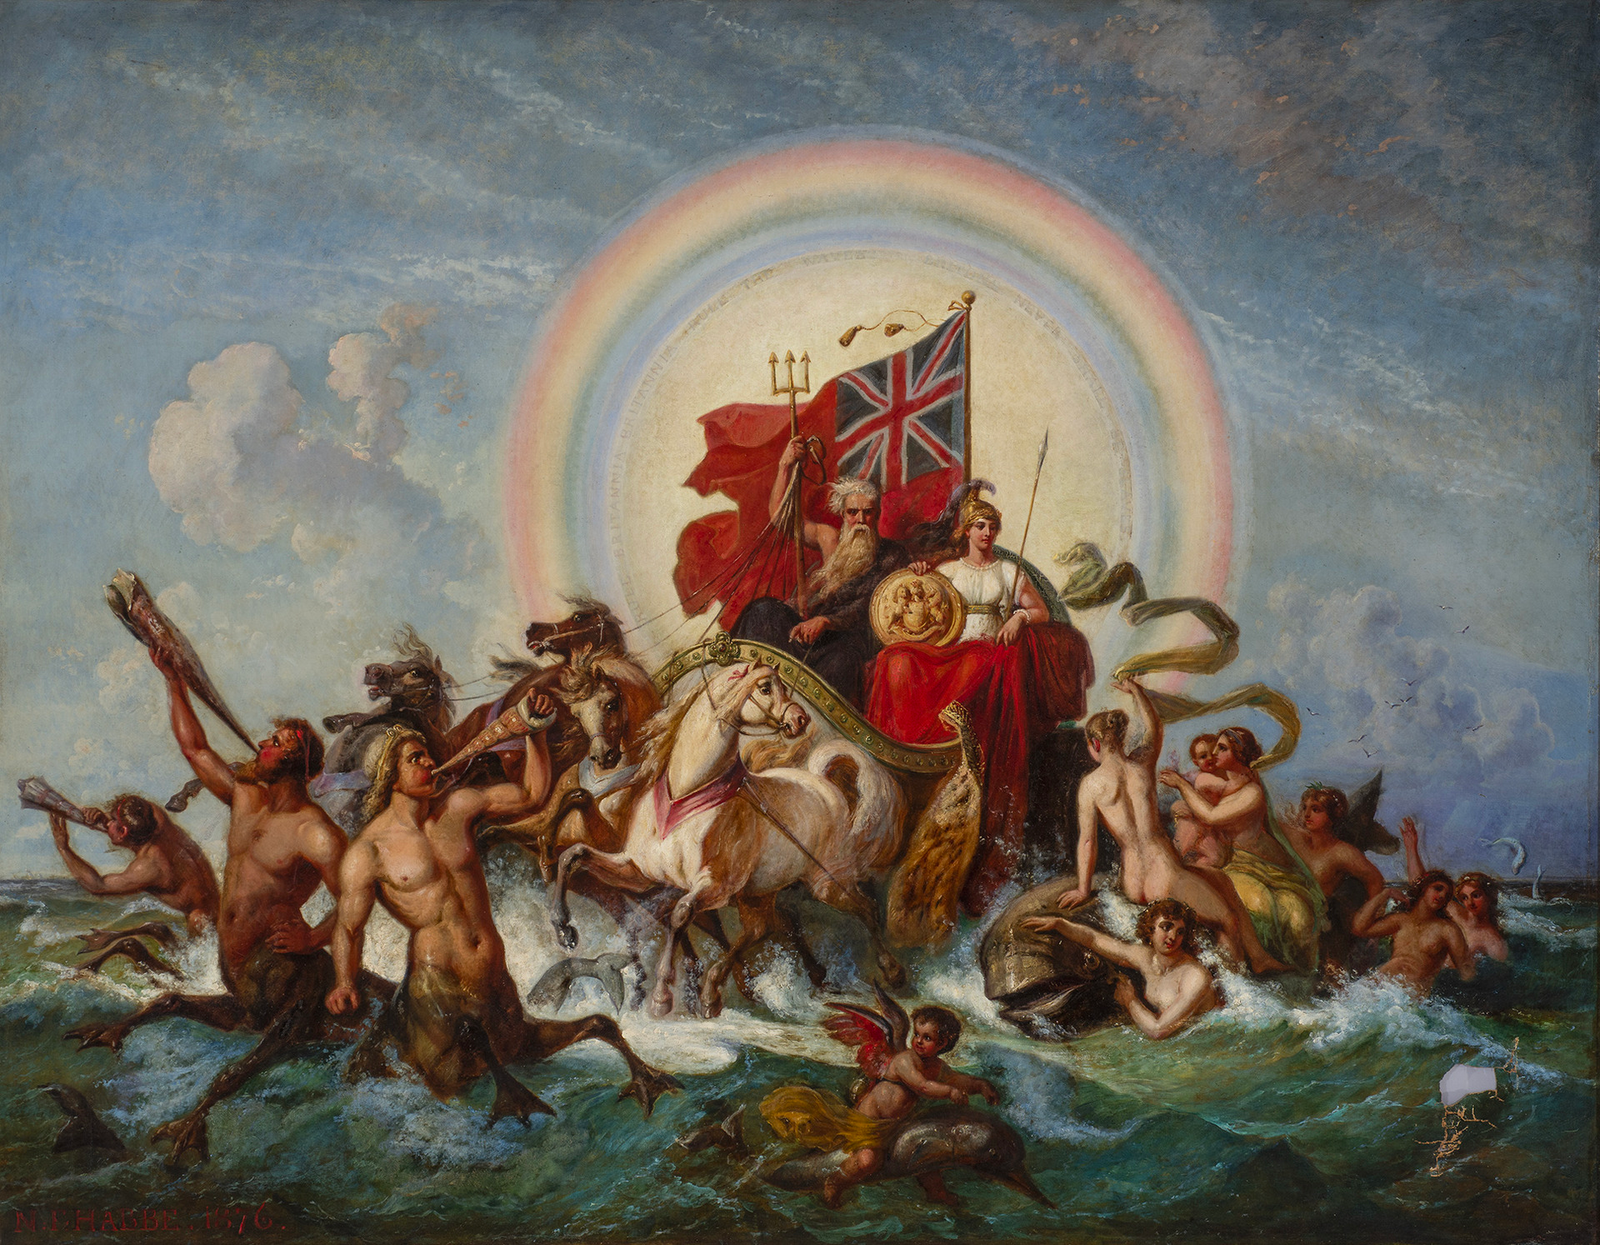  Neptune rules the ocean with Britannia at his right hand